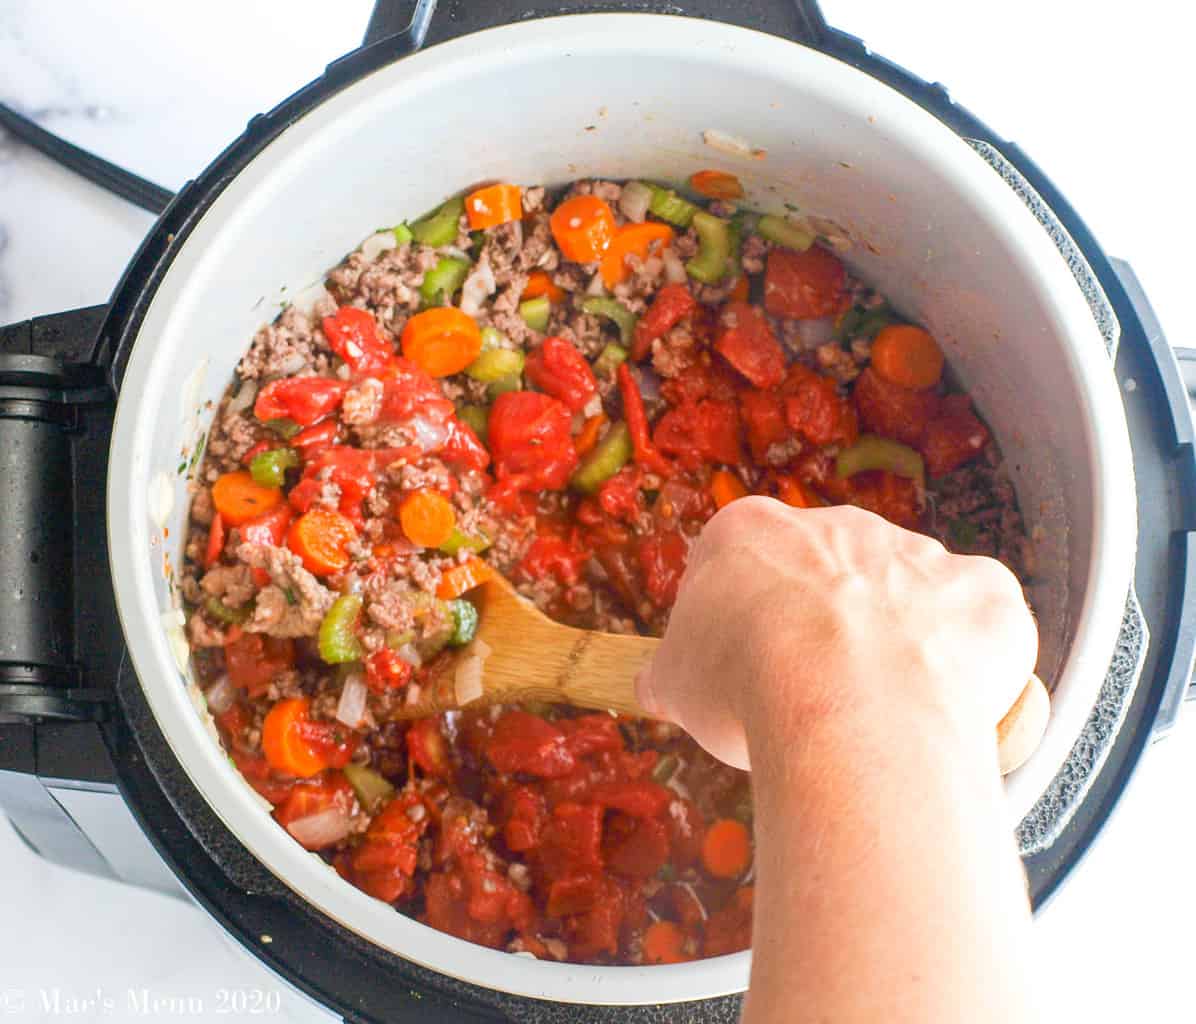 Stiring the meat and veggies in the pressure cooker